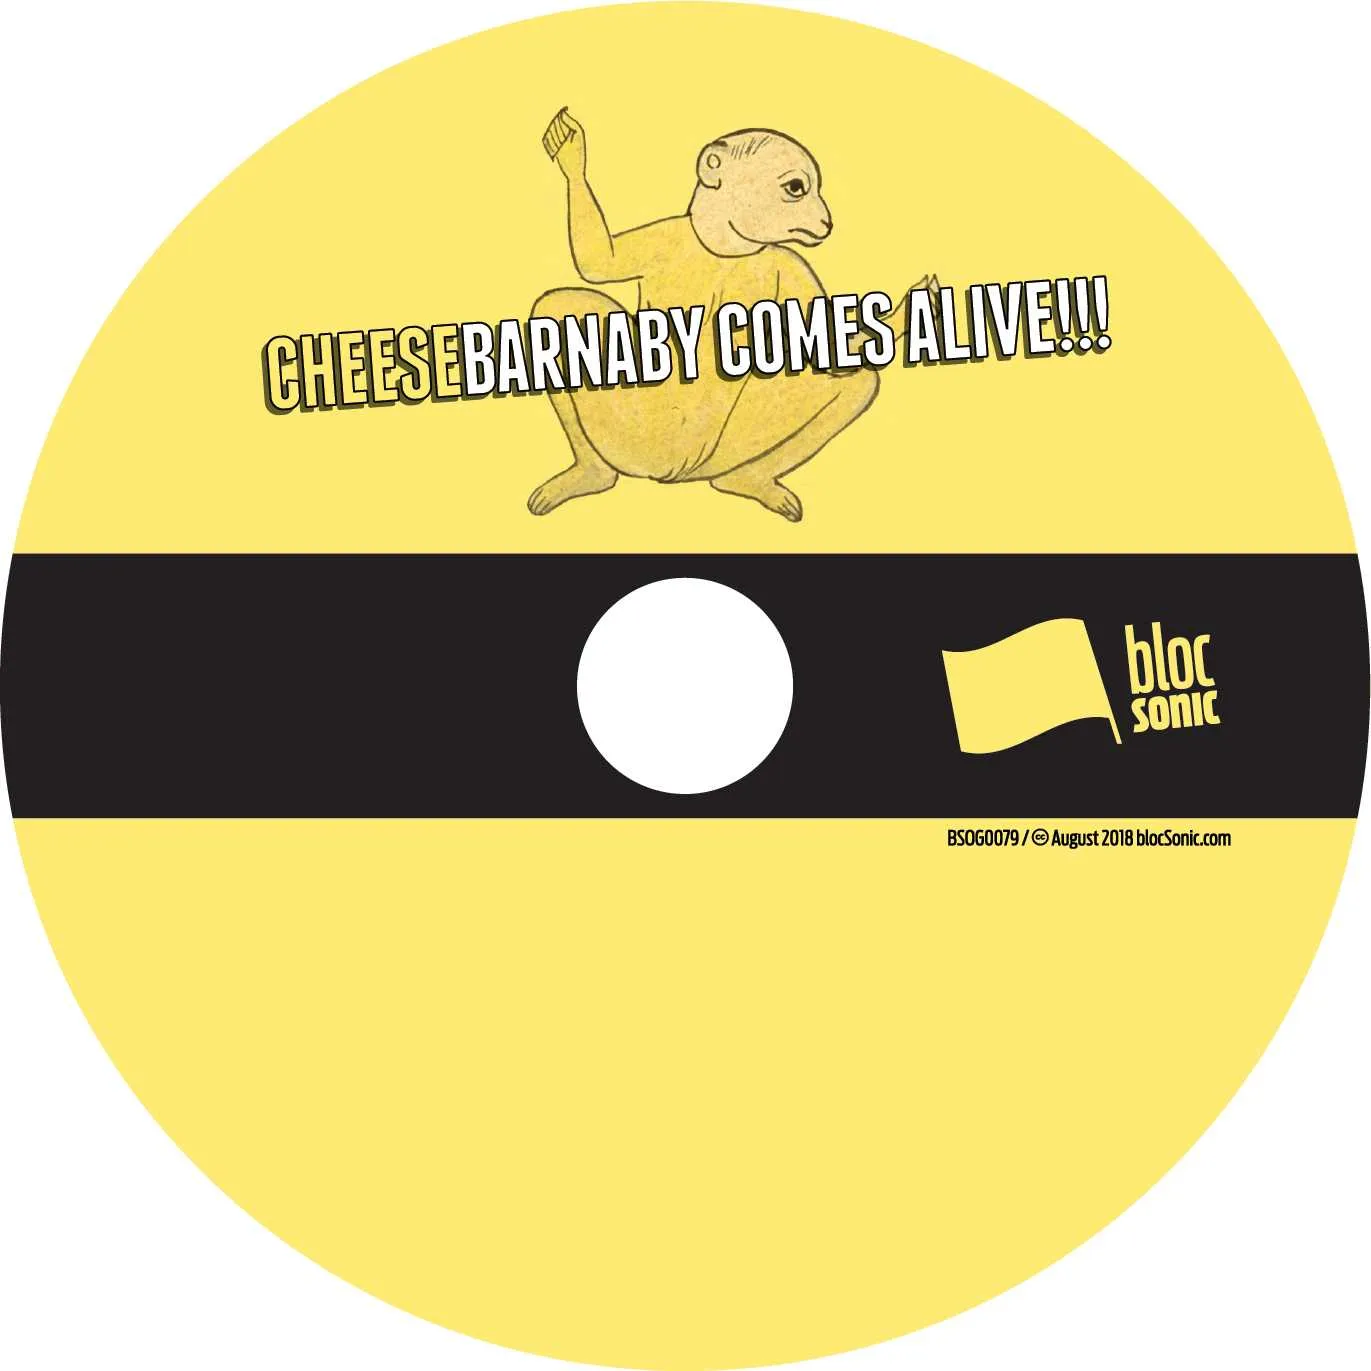 Album disc for “Barnaby Comes Alive!!!” by Cheese